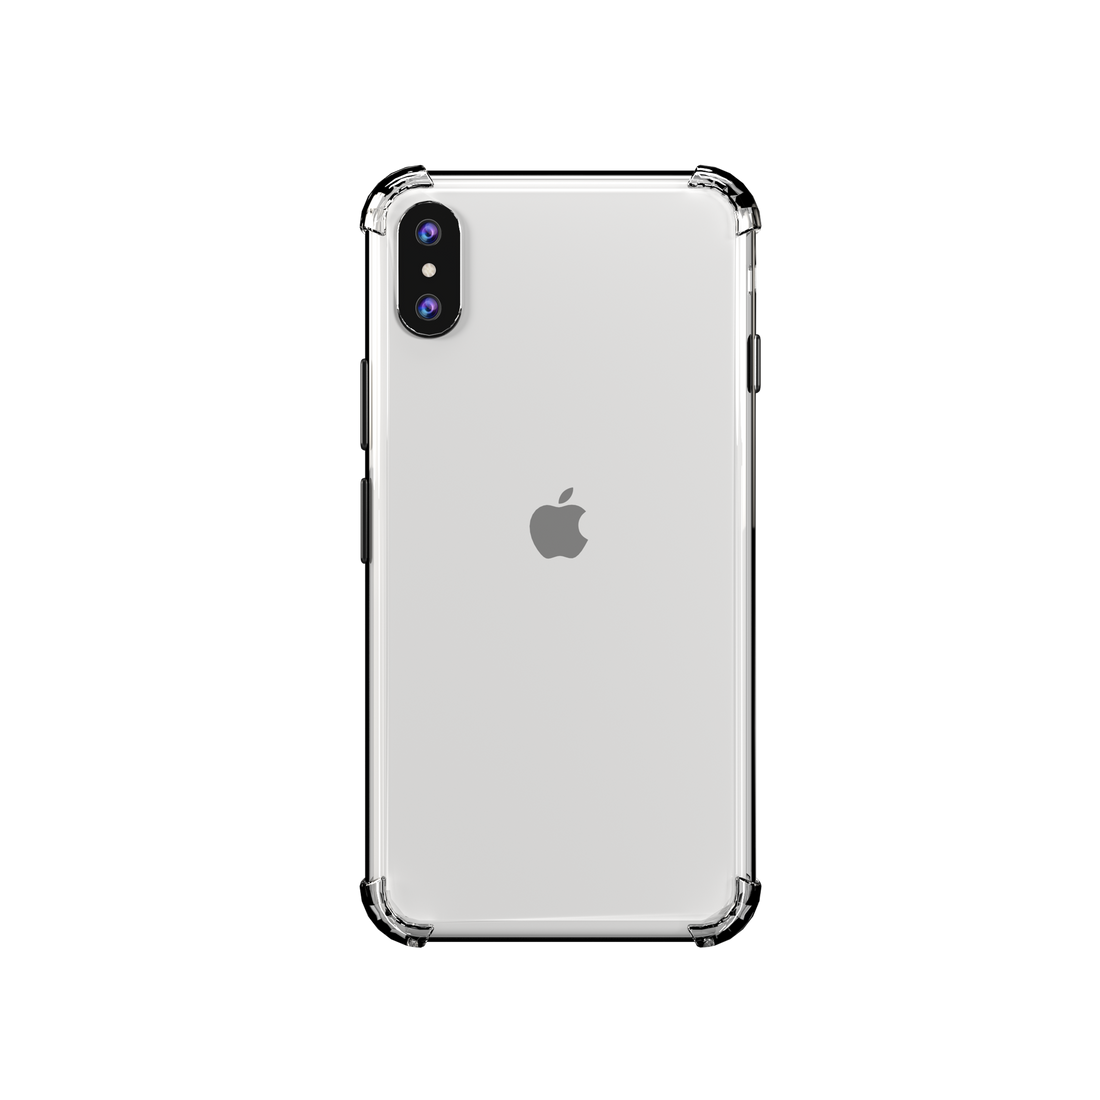 The Clear iPhone Case